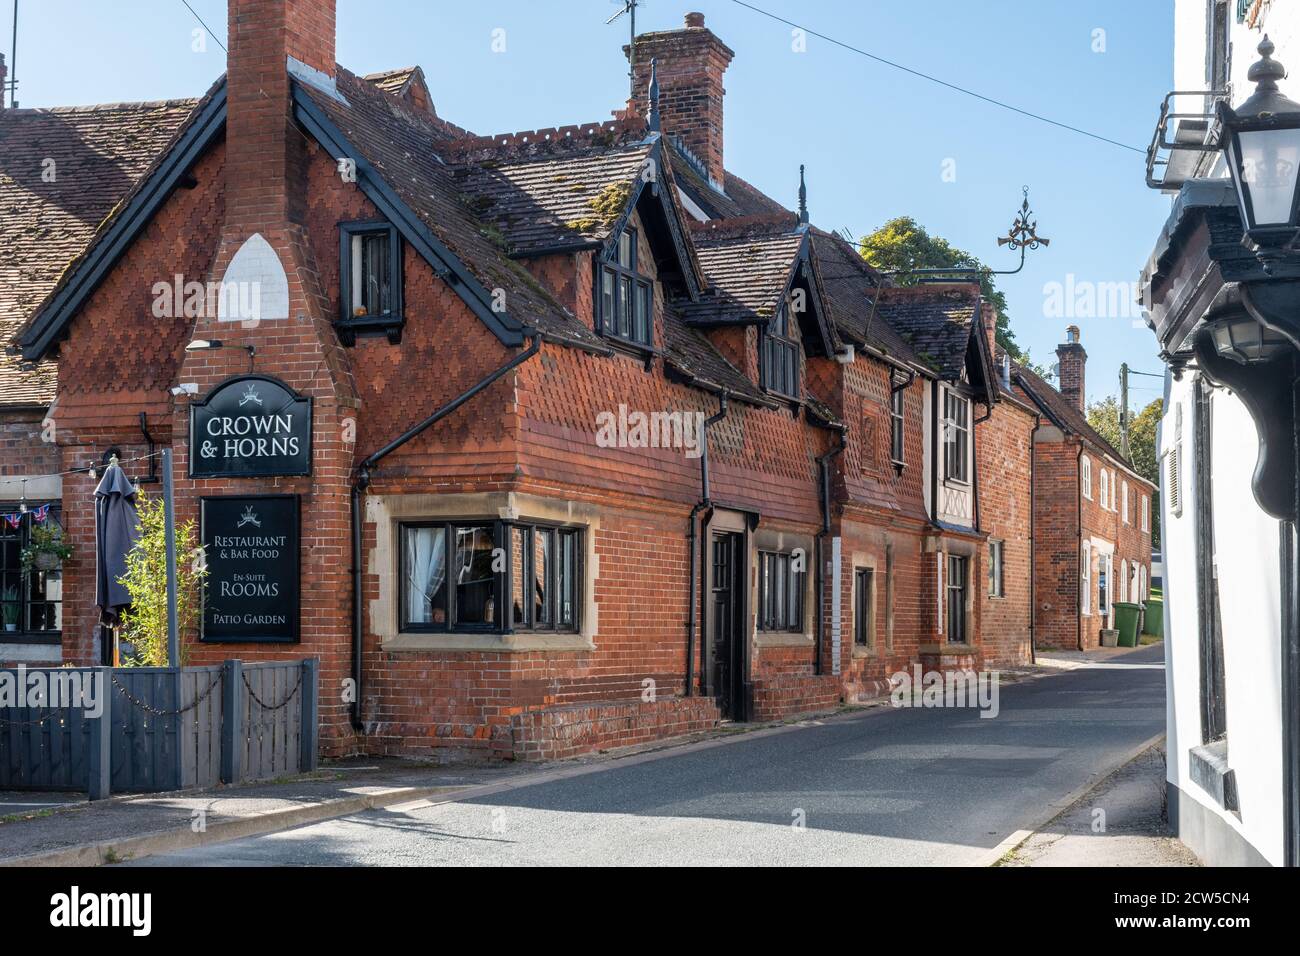 The historic Crown and Horns pub in the pretty village of East Ilsley, Berkshire, England, UK Stock Photo